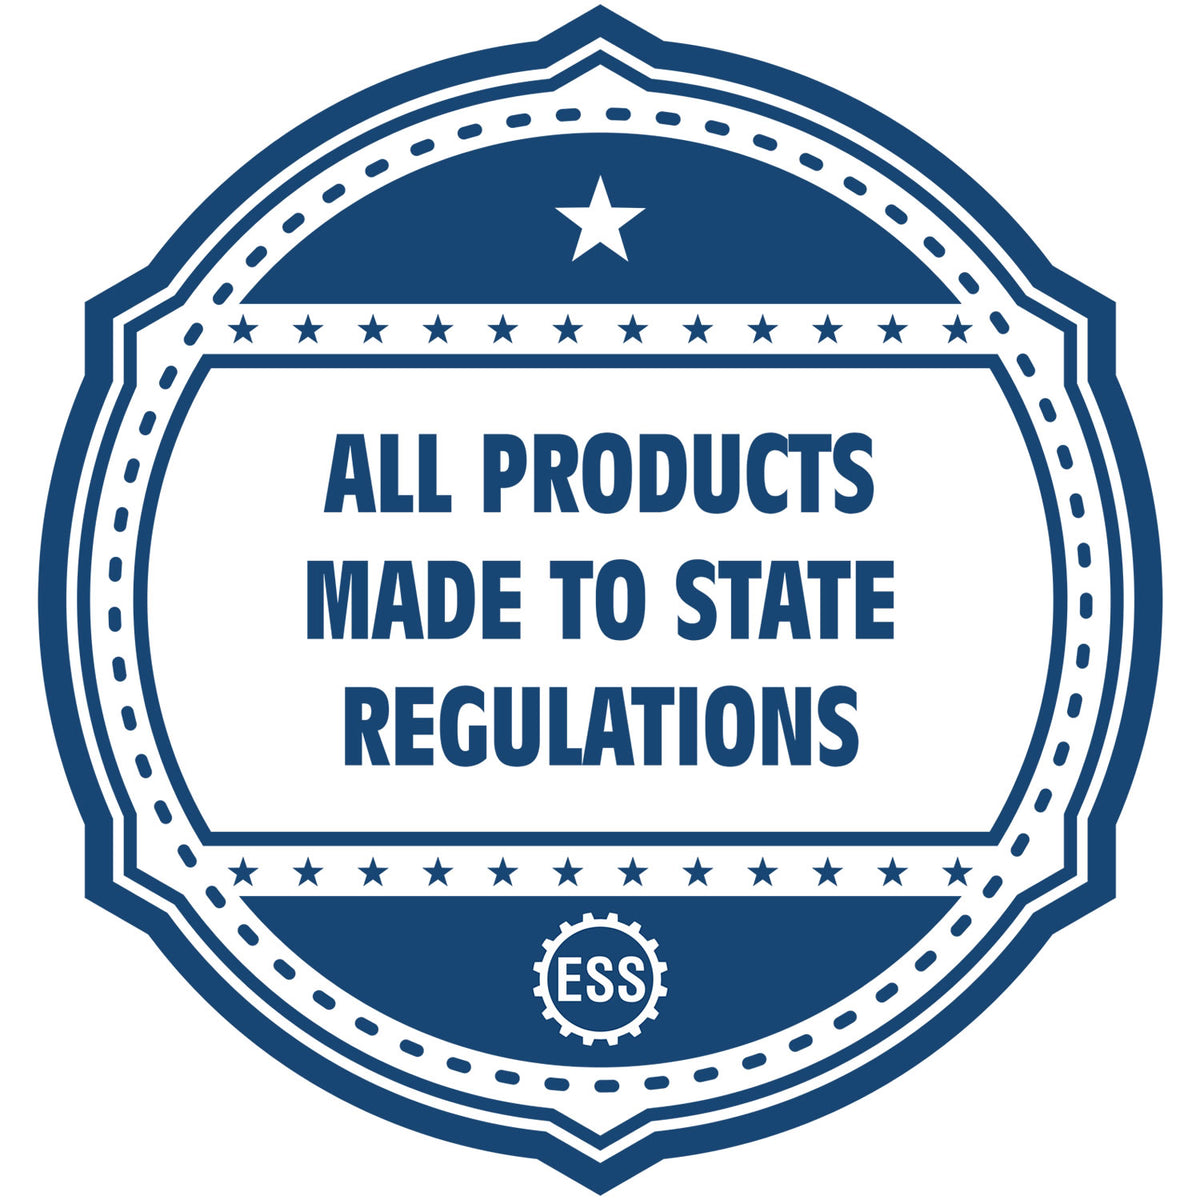 A blue icon or badge for the Hybrid West Virginia Land Surveyor Seal showing that this product is made in compliance with state regulations.